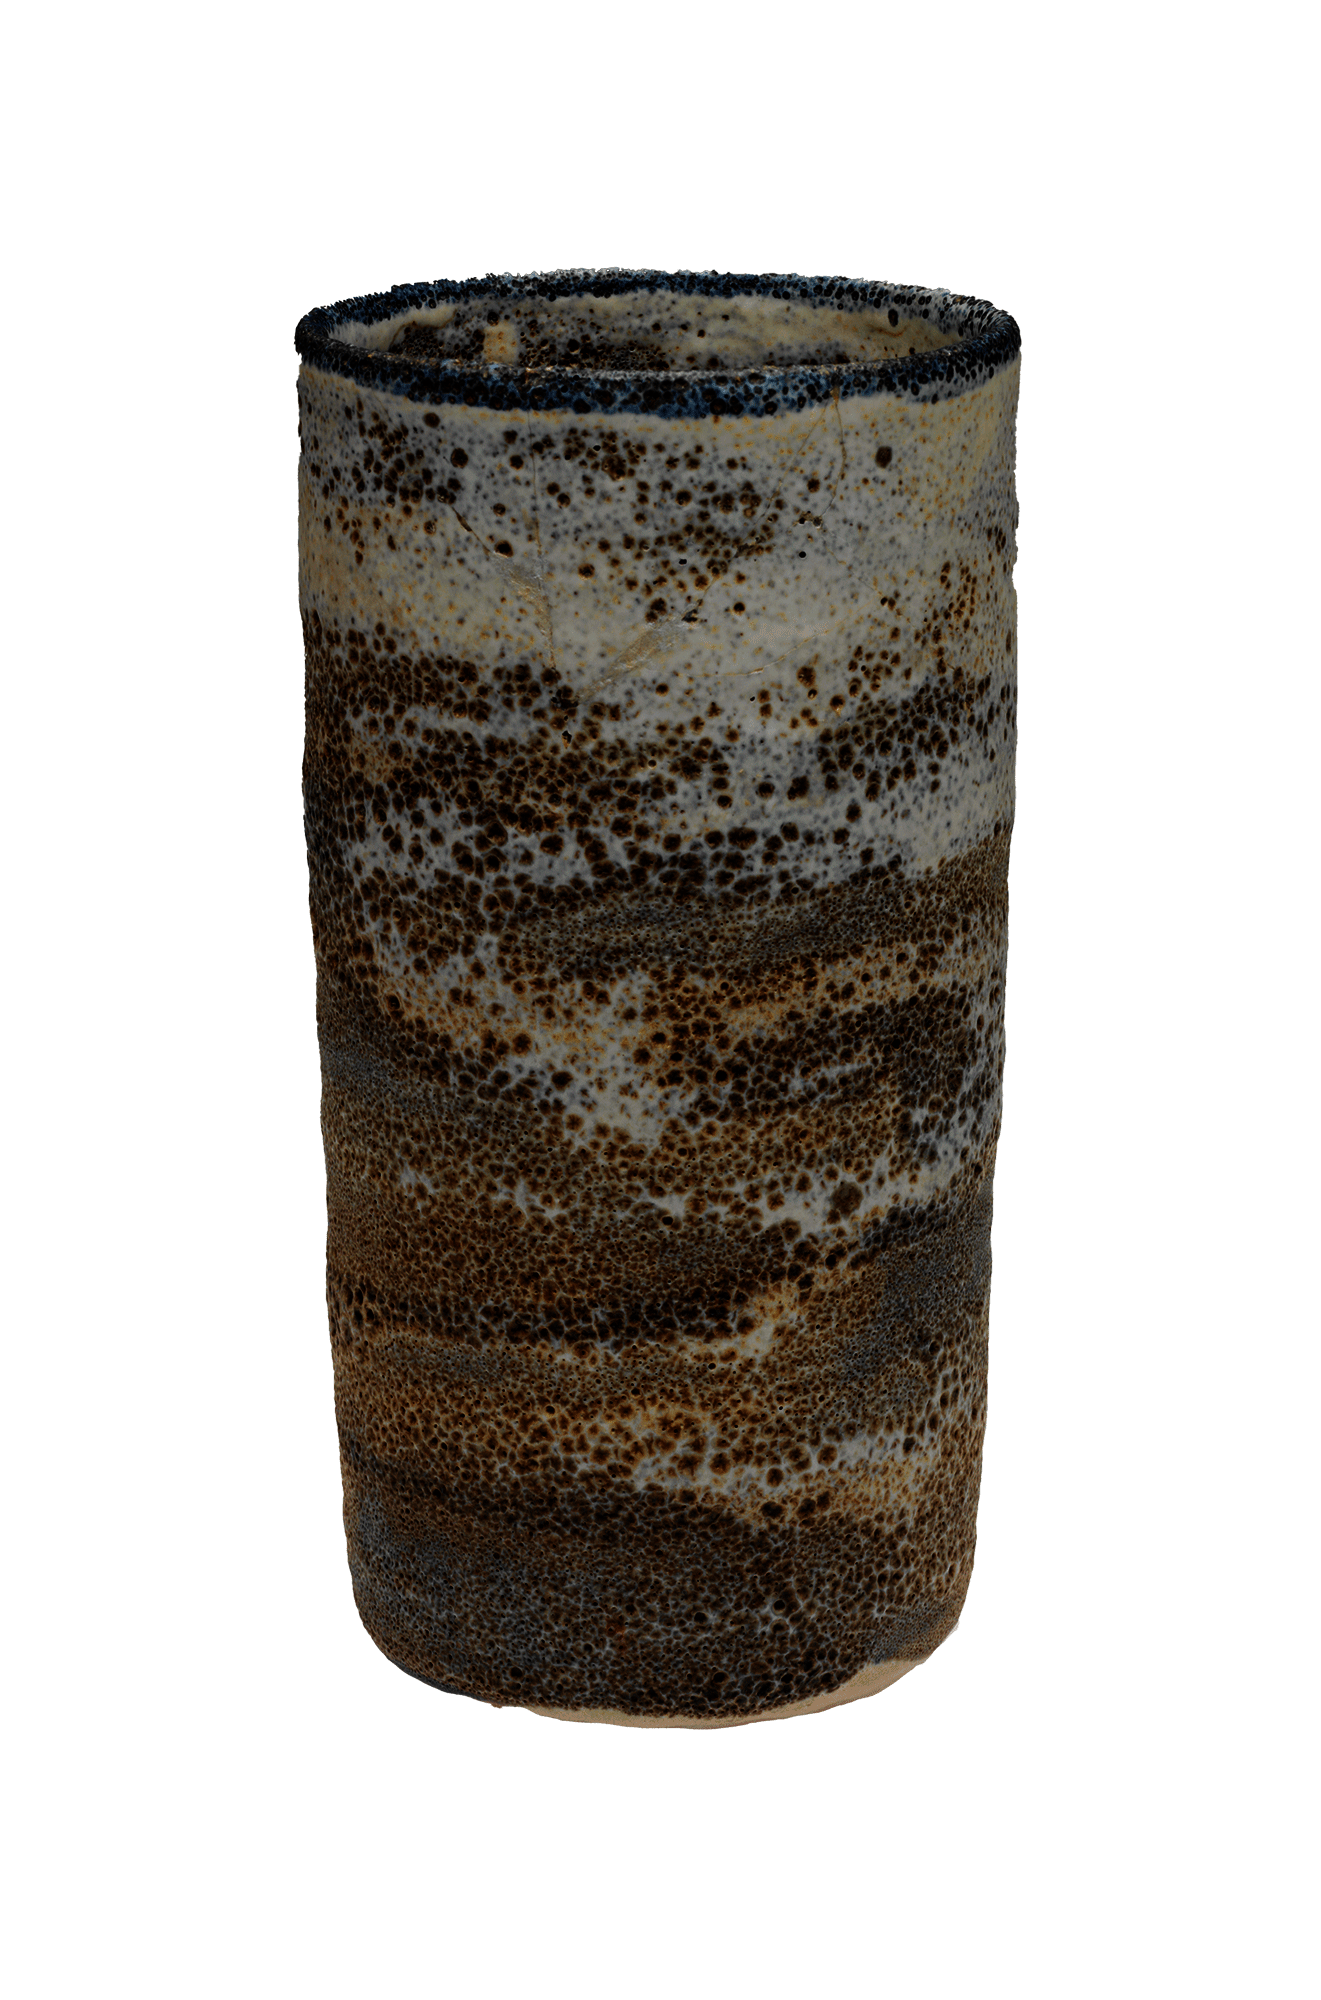 Stoneware vase with speckled brown glaze decoration and a blue rim